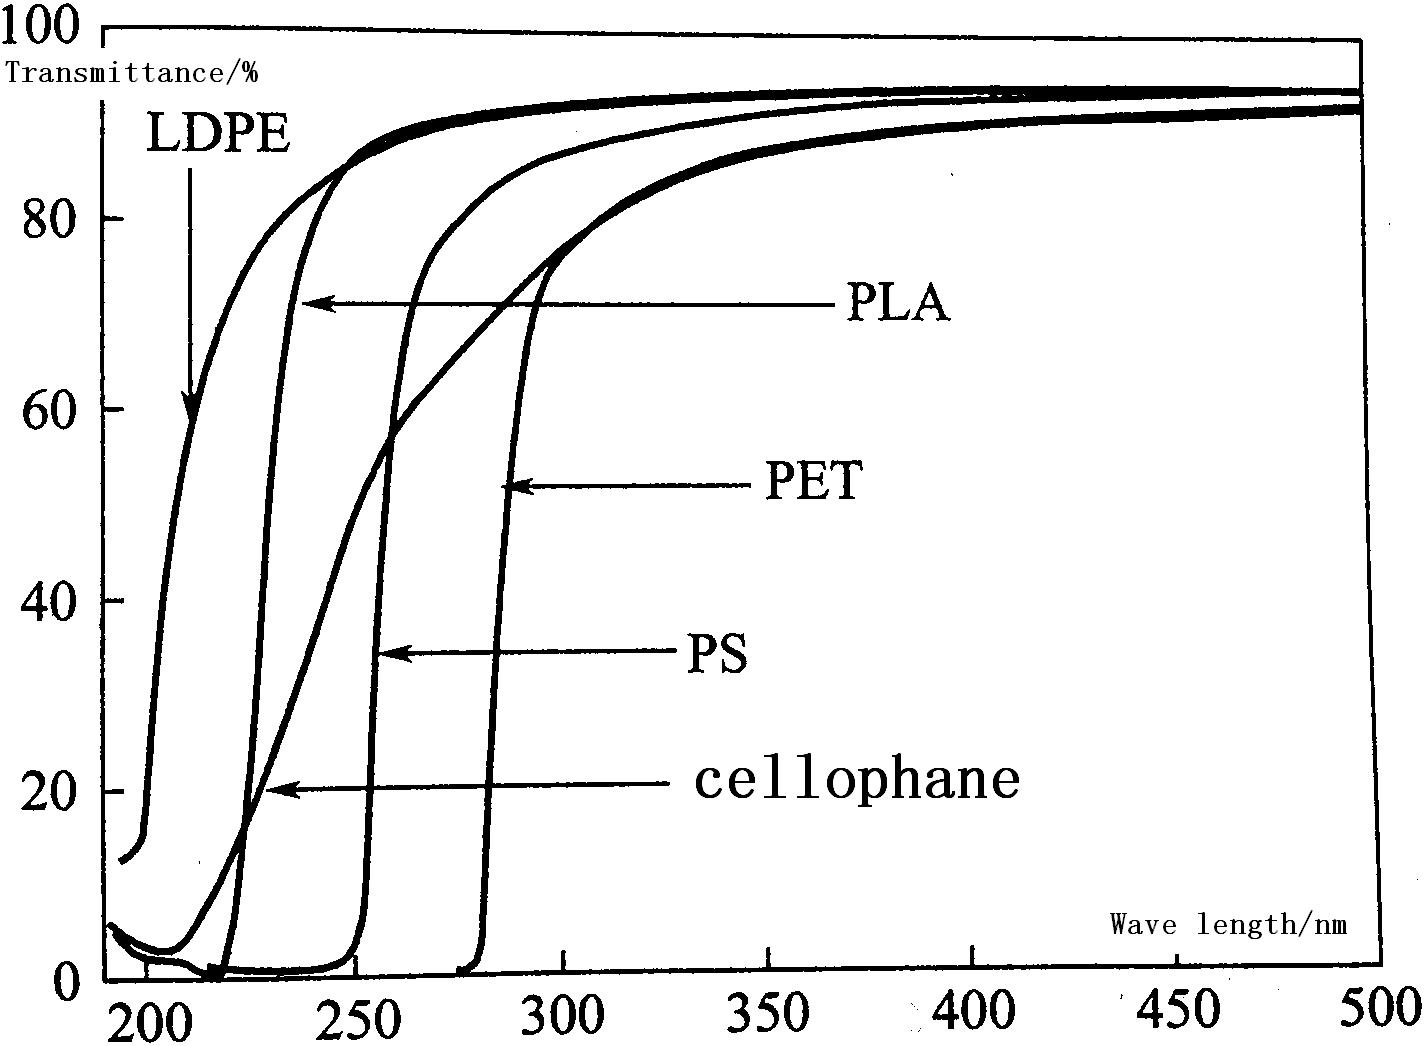 Transmittance of PLA, PET, PS, LDPE and cellophane films